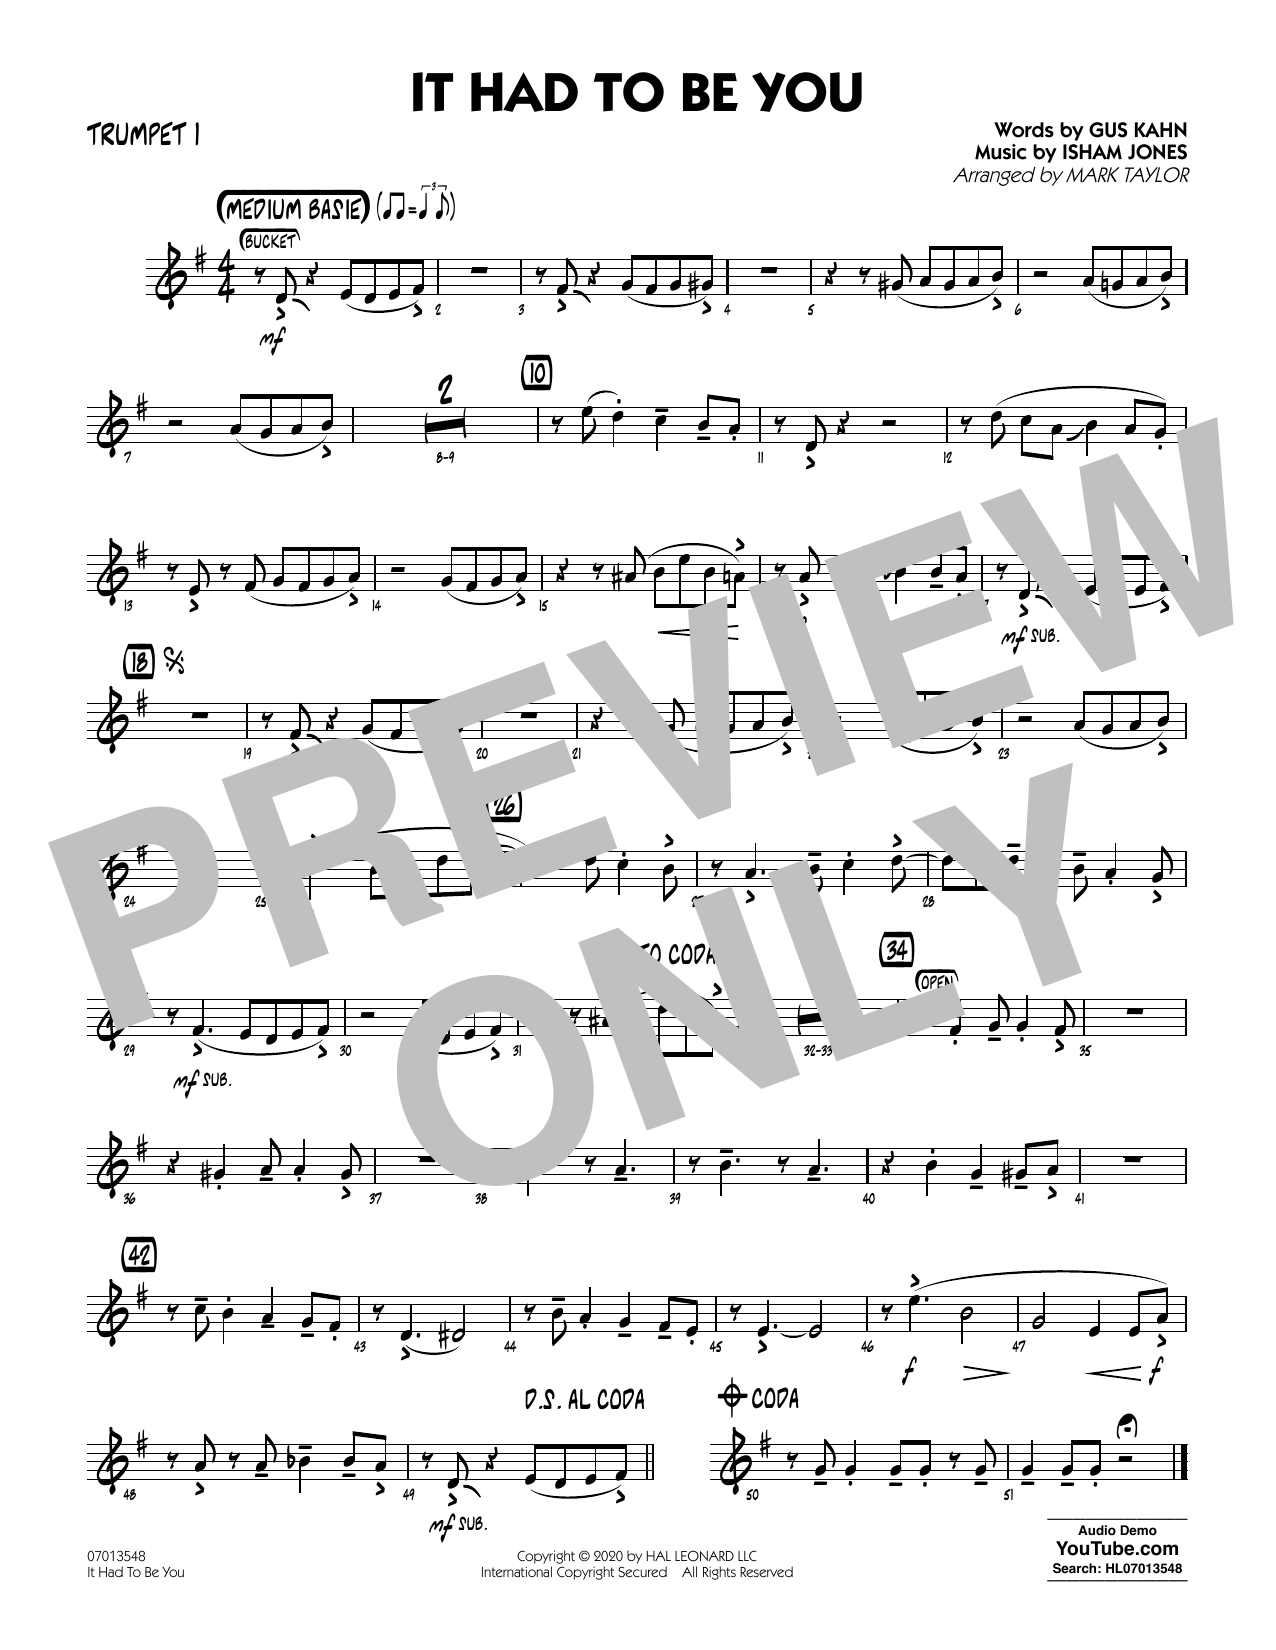 Download Isham Jones and Gus Kahn It Had to Be You (arr. Mark Taylor) - T Sheet Music